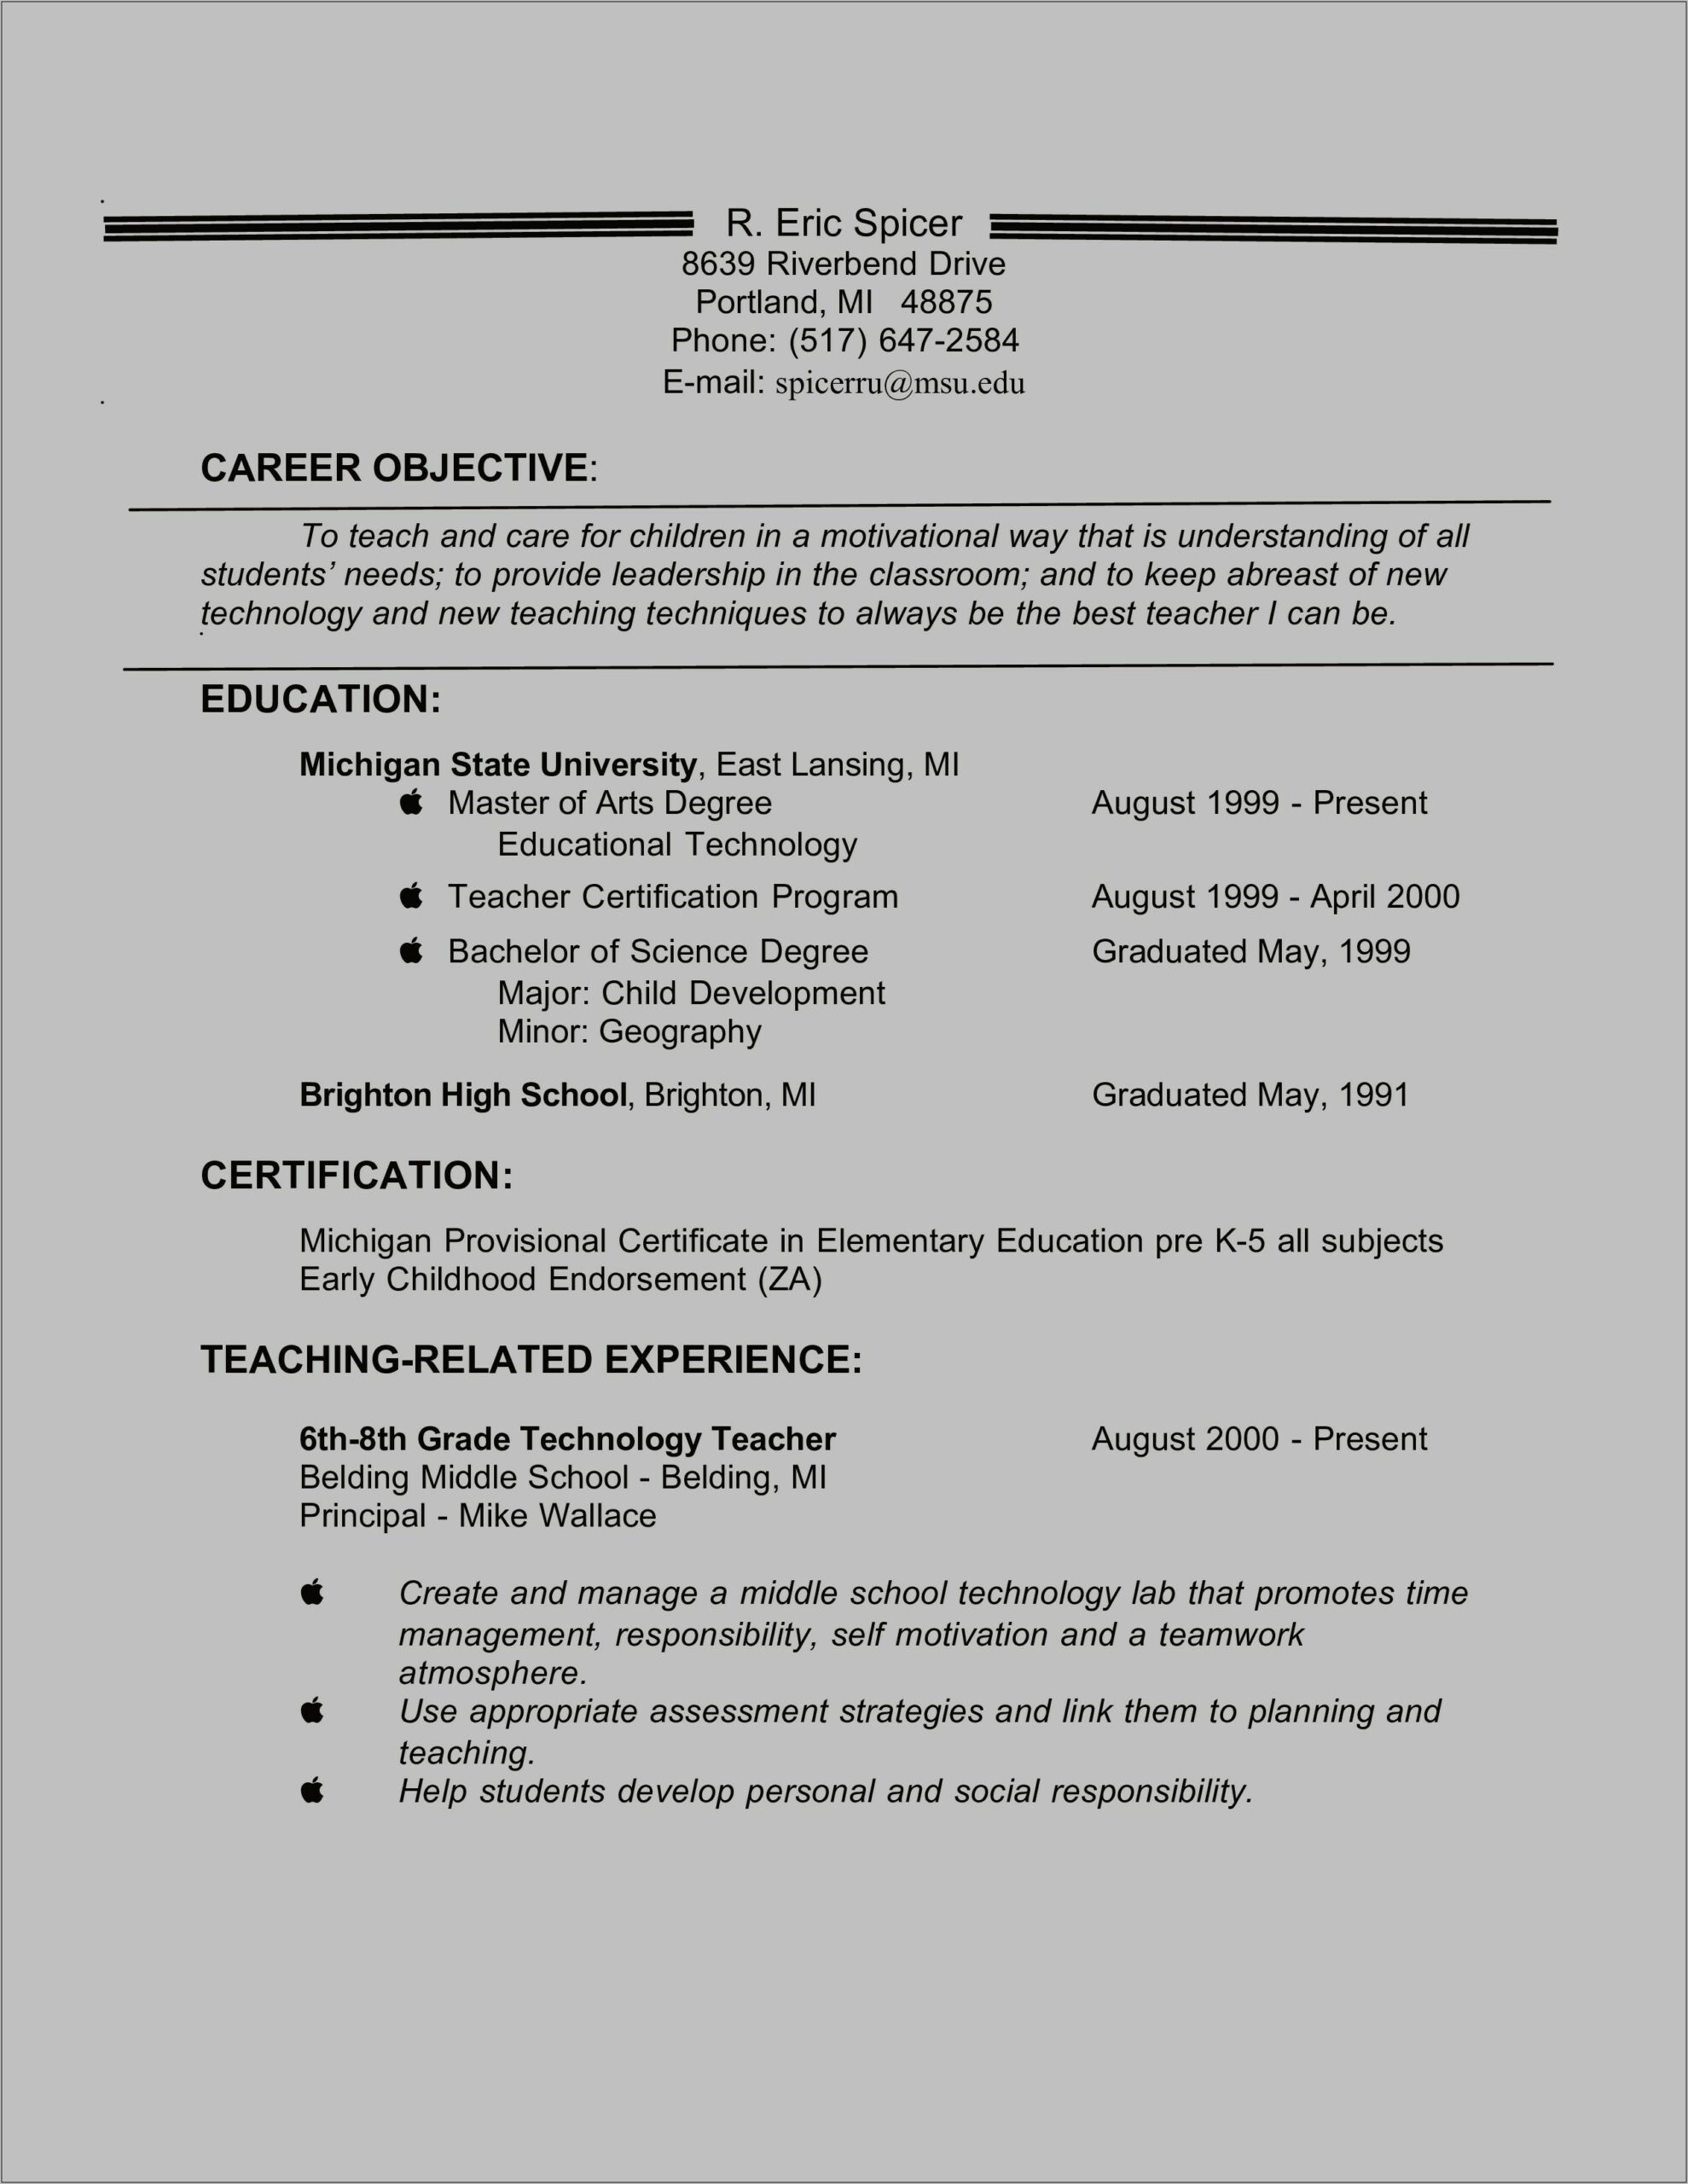 career objective for resume format